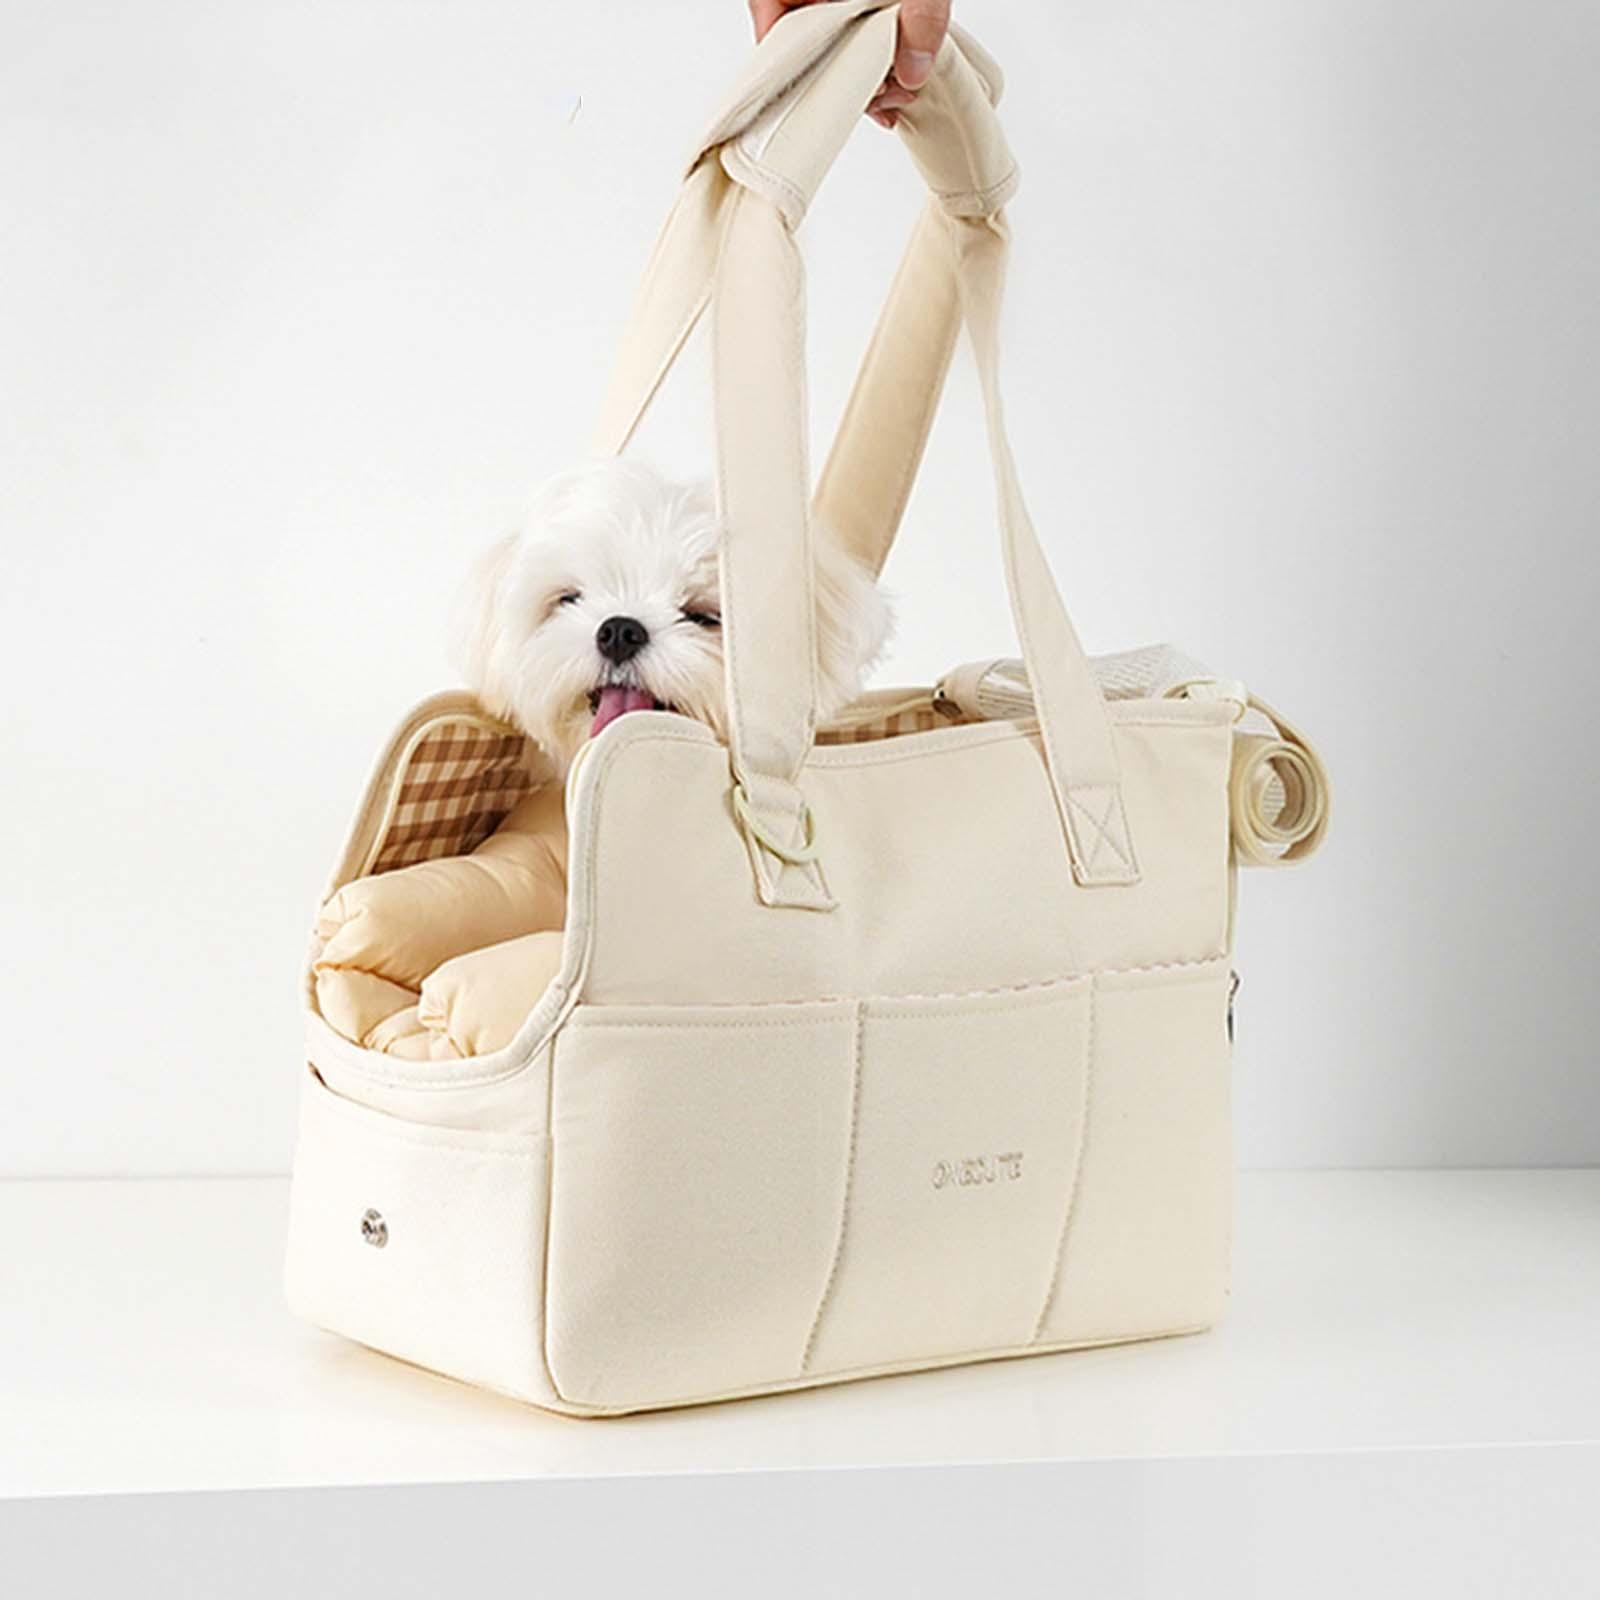 Carrier Bag, Durable Portable Puppy Handbag for Travel Carrying Pet Supplies